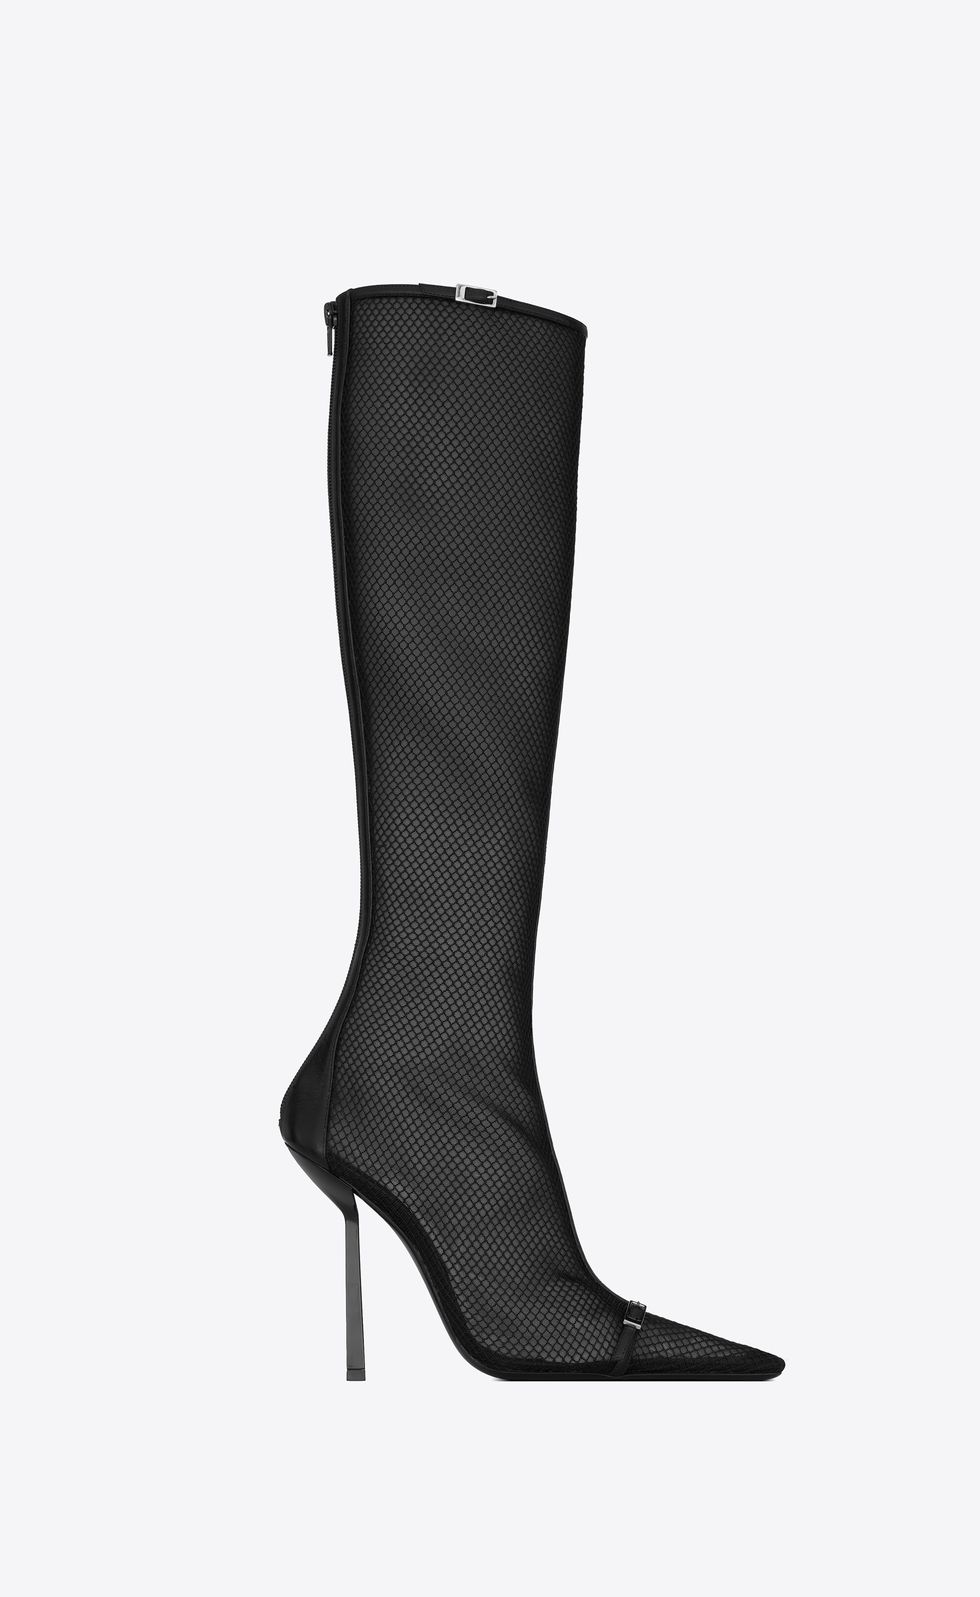 a black boot with a black sole